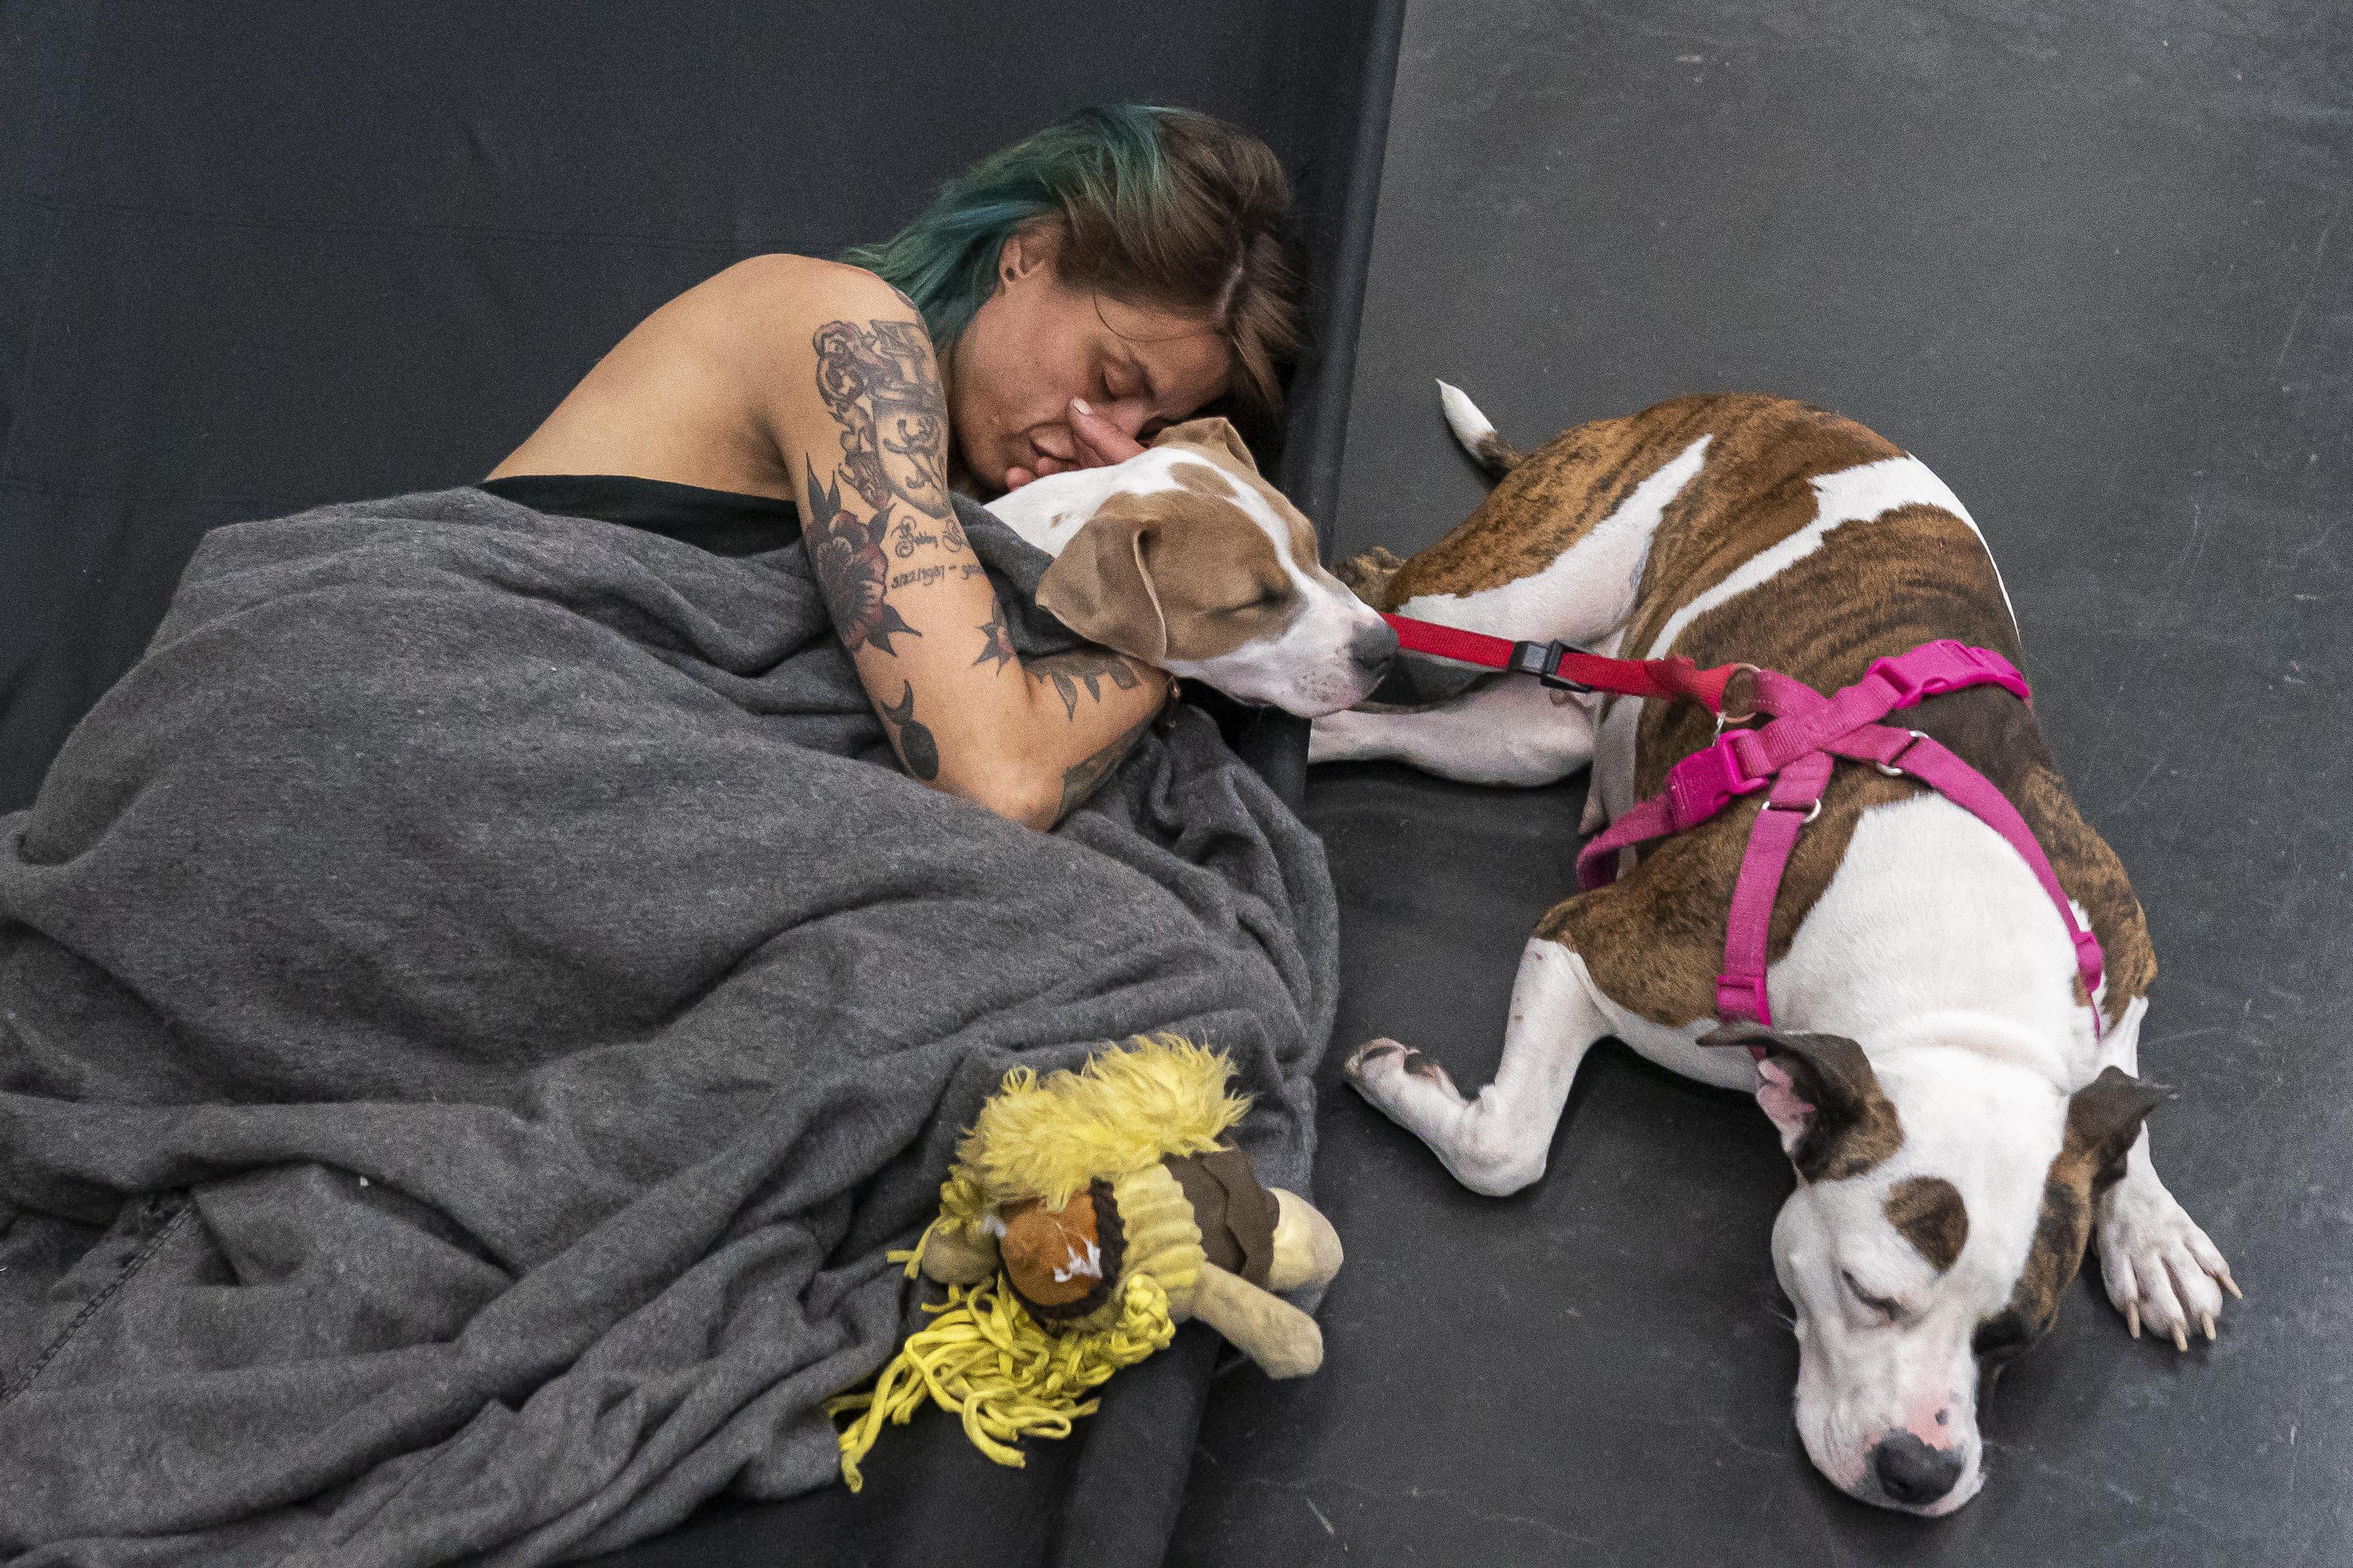 A woman under a blanket cuddles with one dog while another sits right next to them.